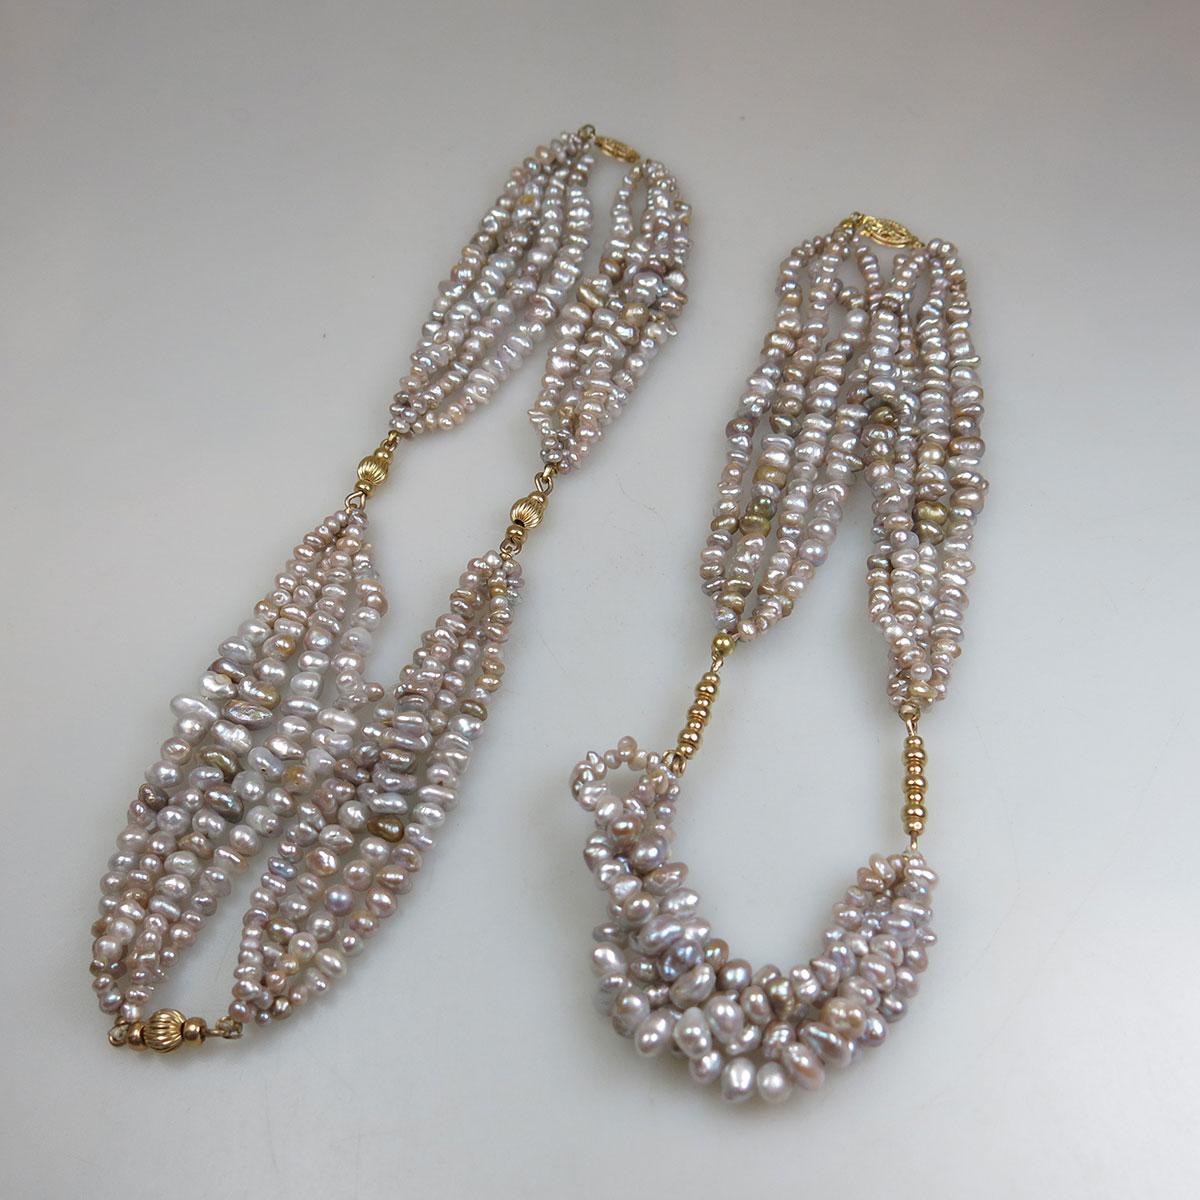 2 Four Strand Baroque Pearl Necklaces